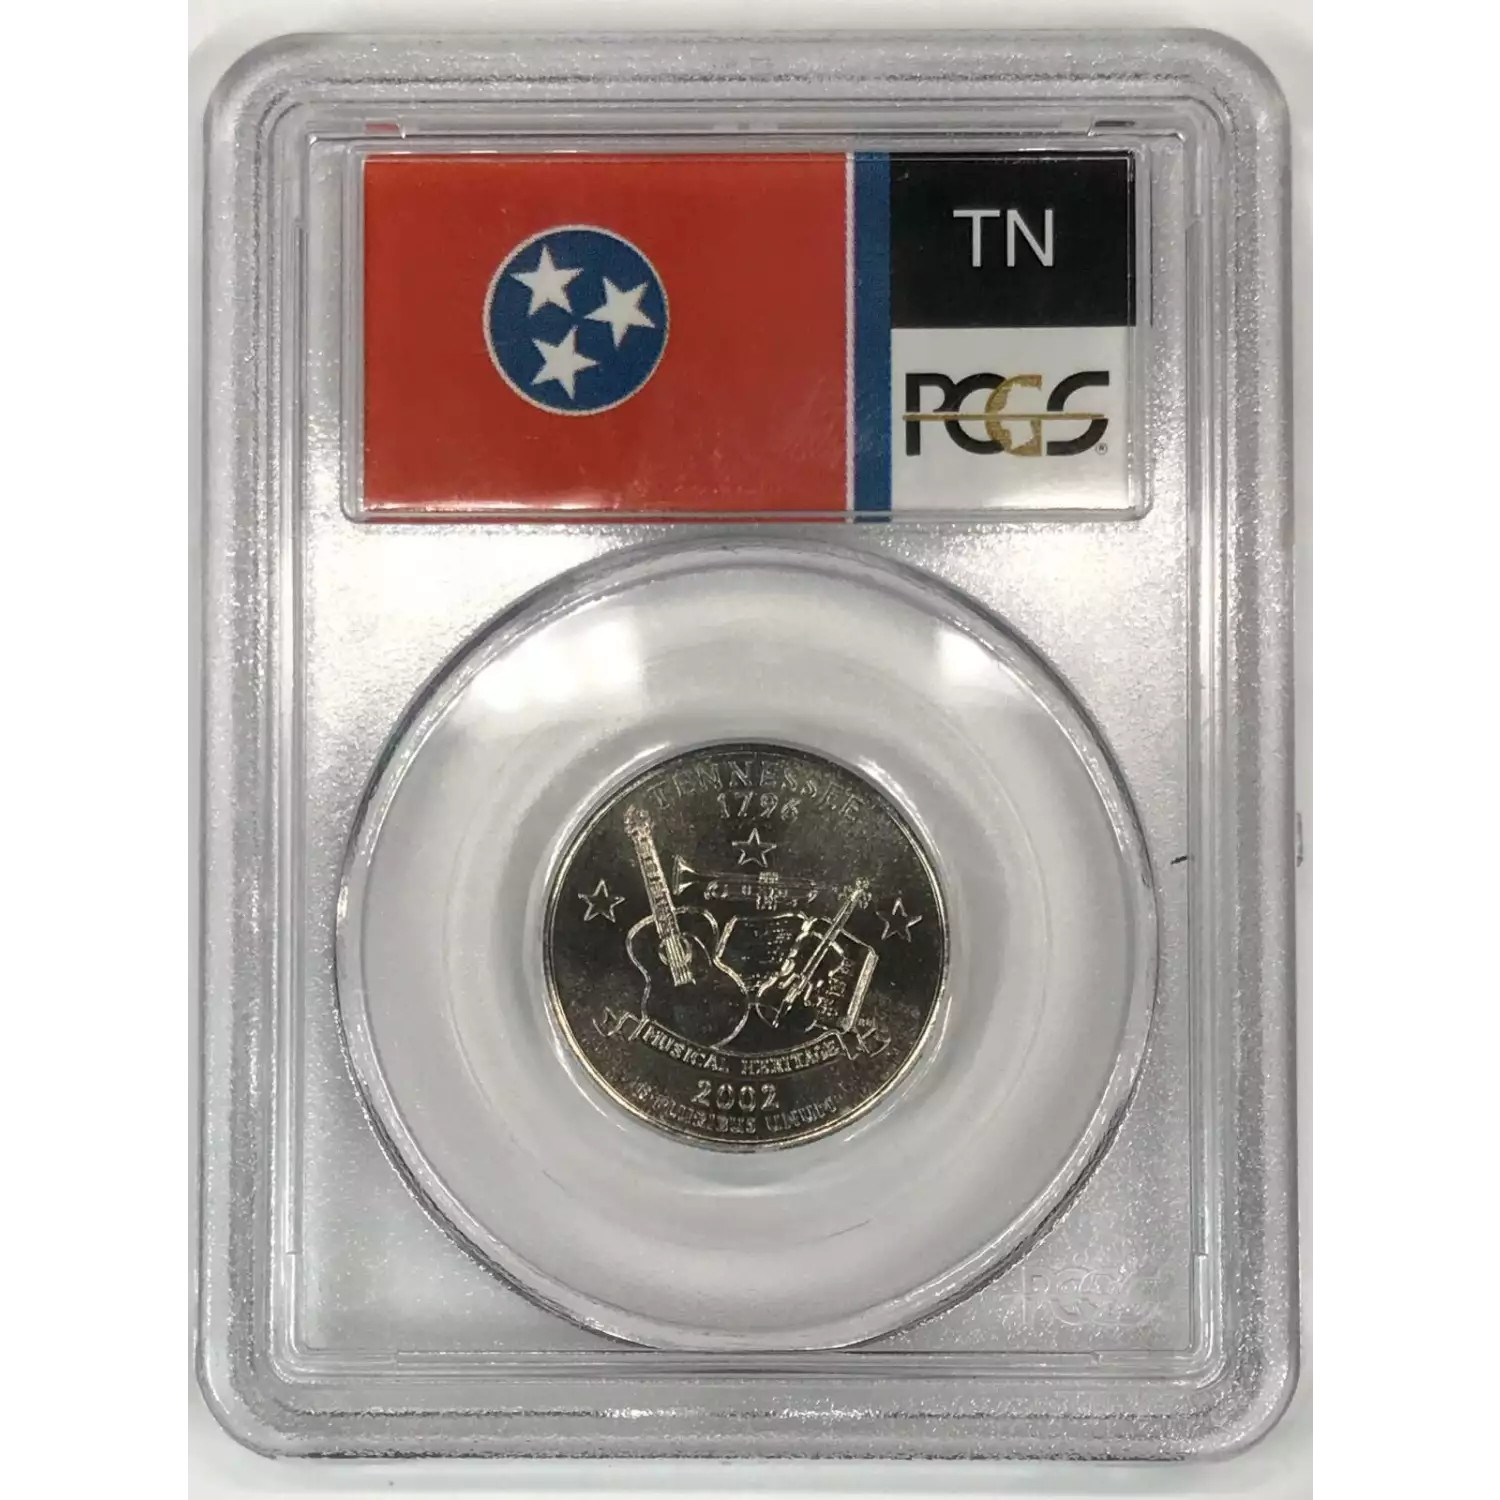 2002-D 25C Tennessee